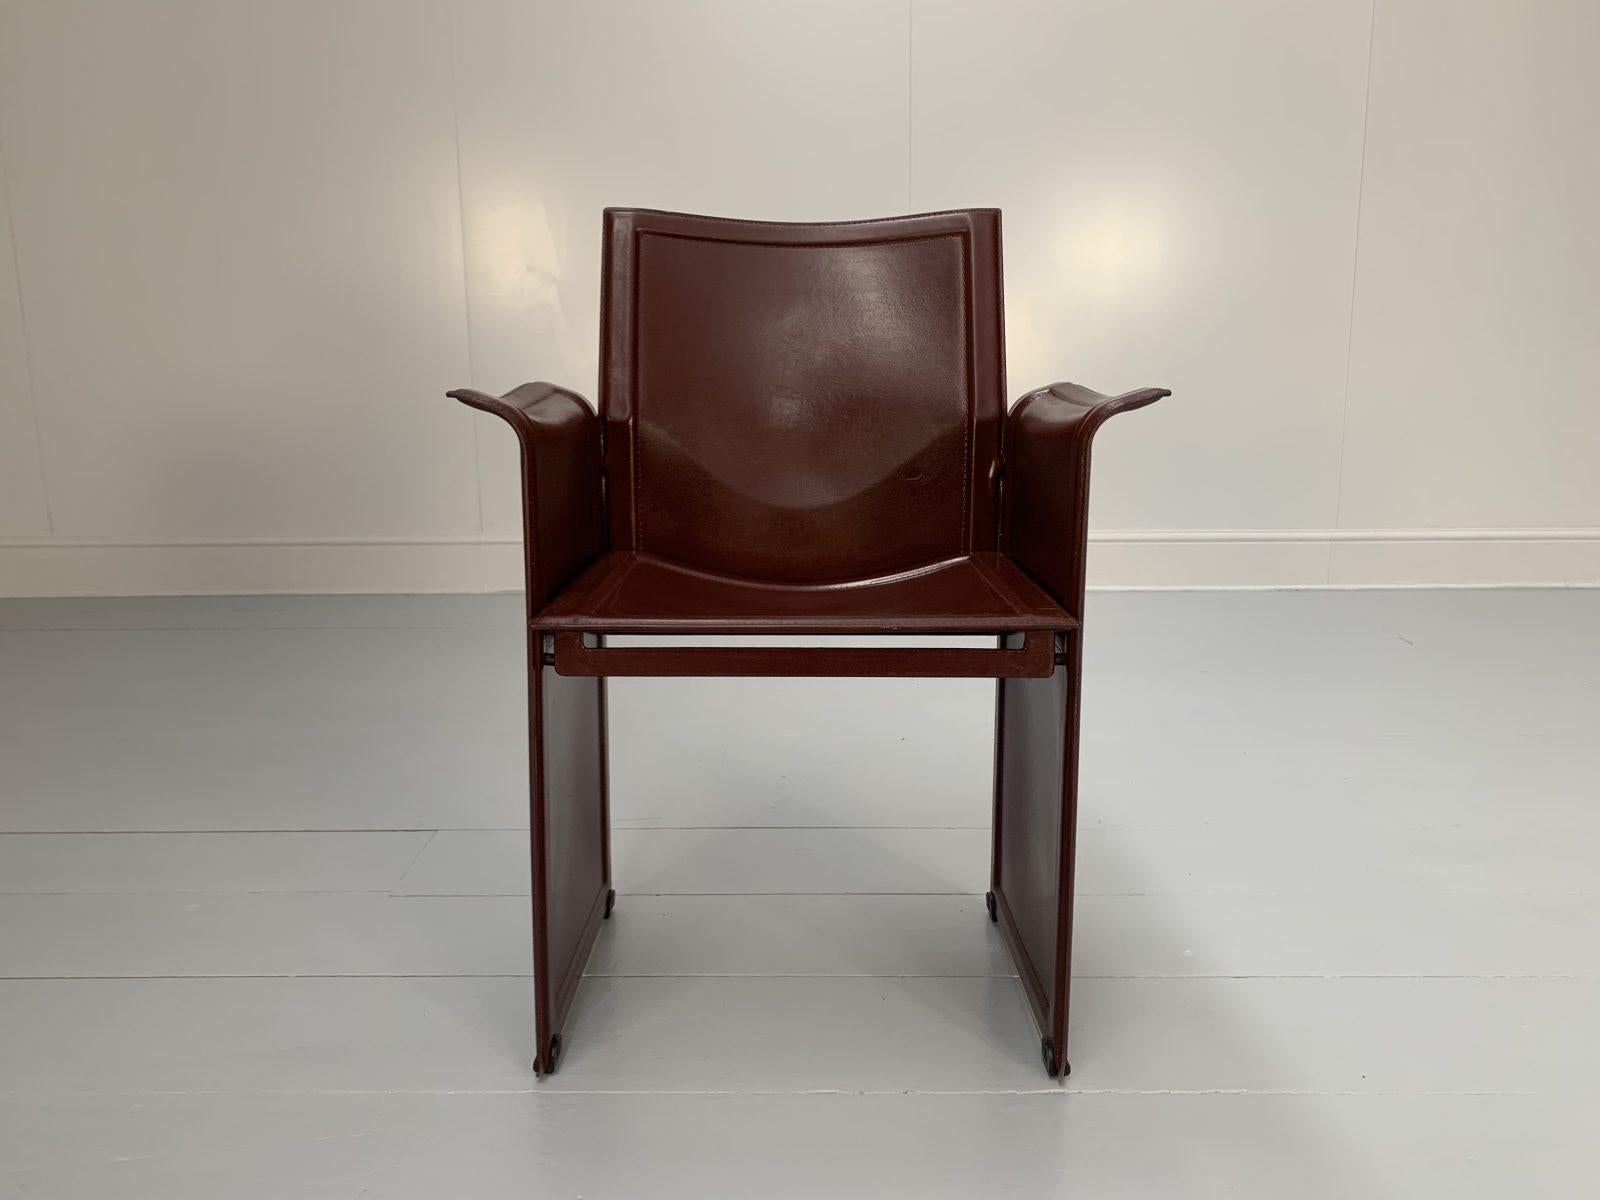 Hello Friends, and welcome to another unmissable offering from Lord Browns Furniture, the UK’s premier resource for fine Sofas and Chairs.

On offer on this occasion is one of the most handsome, refined suites of chairs you could hope to